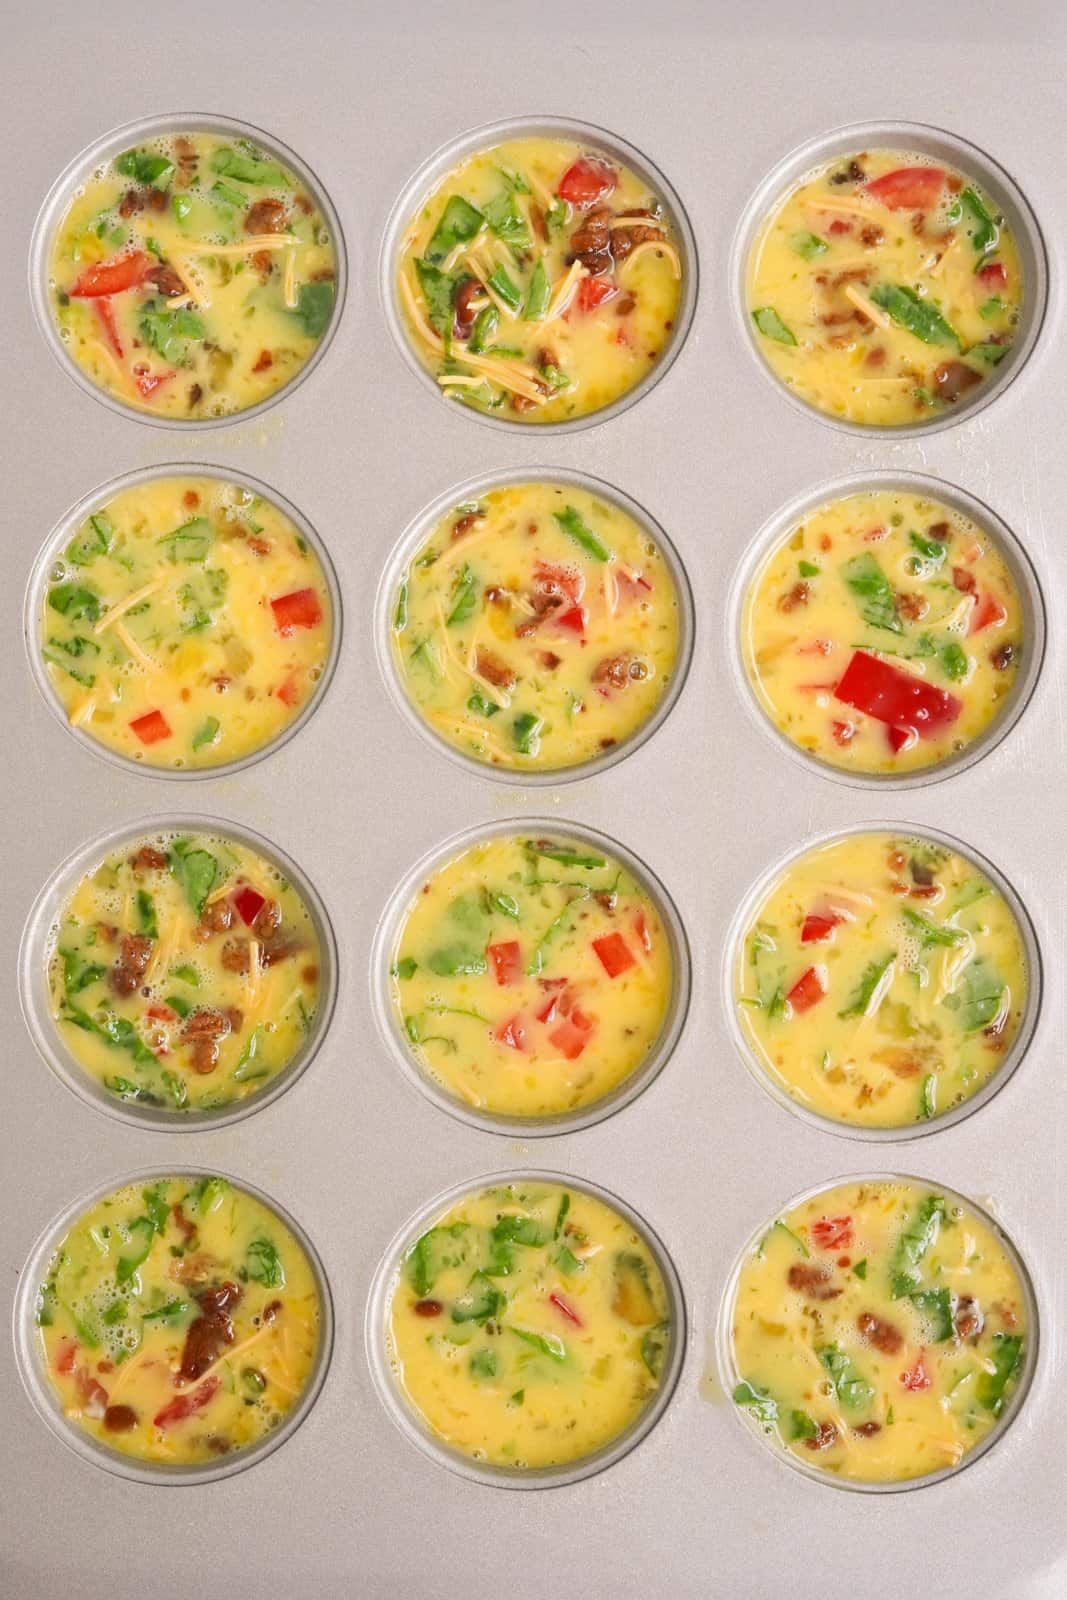 Egg mixture put into wells of muffin tin.